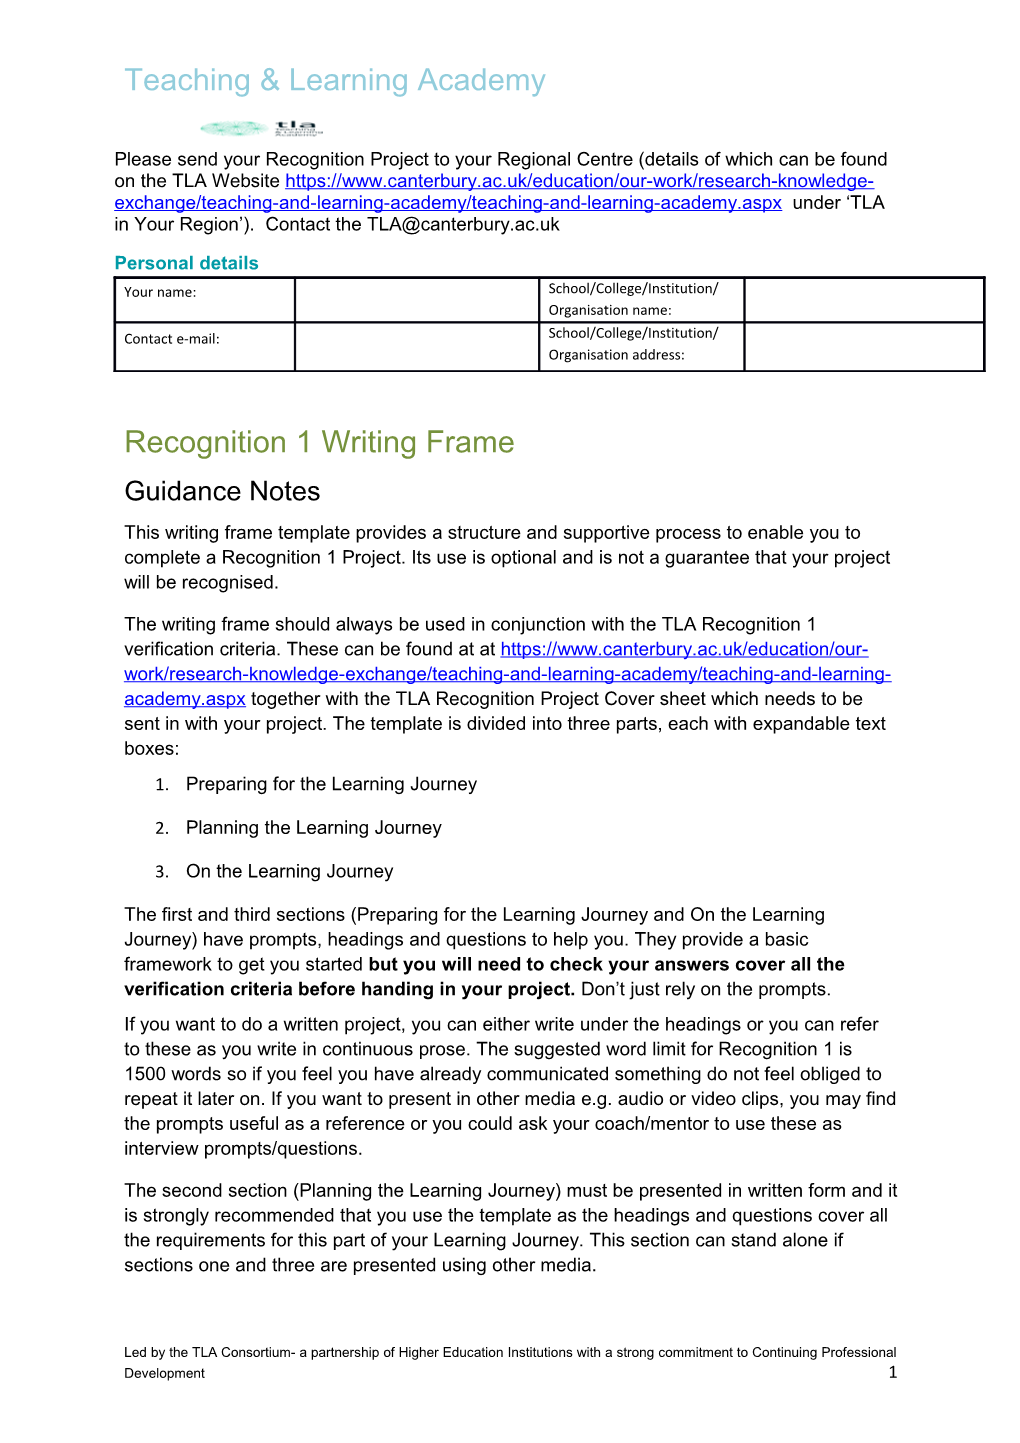 Recognition One Writing Frame